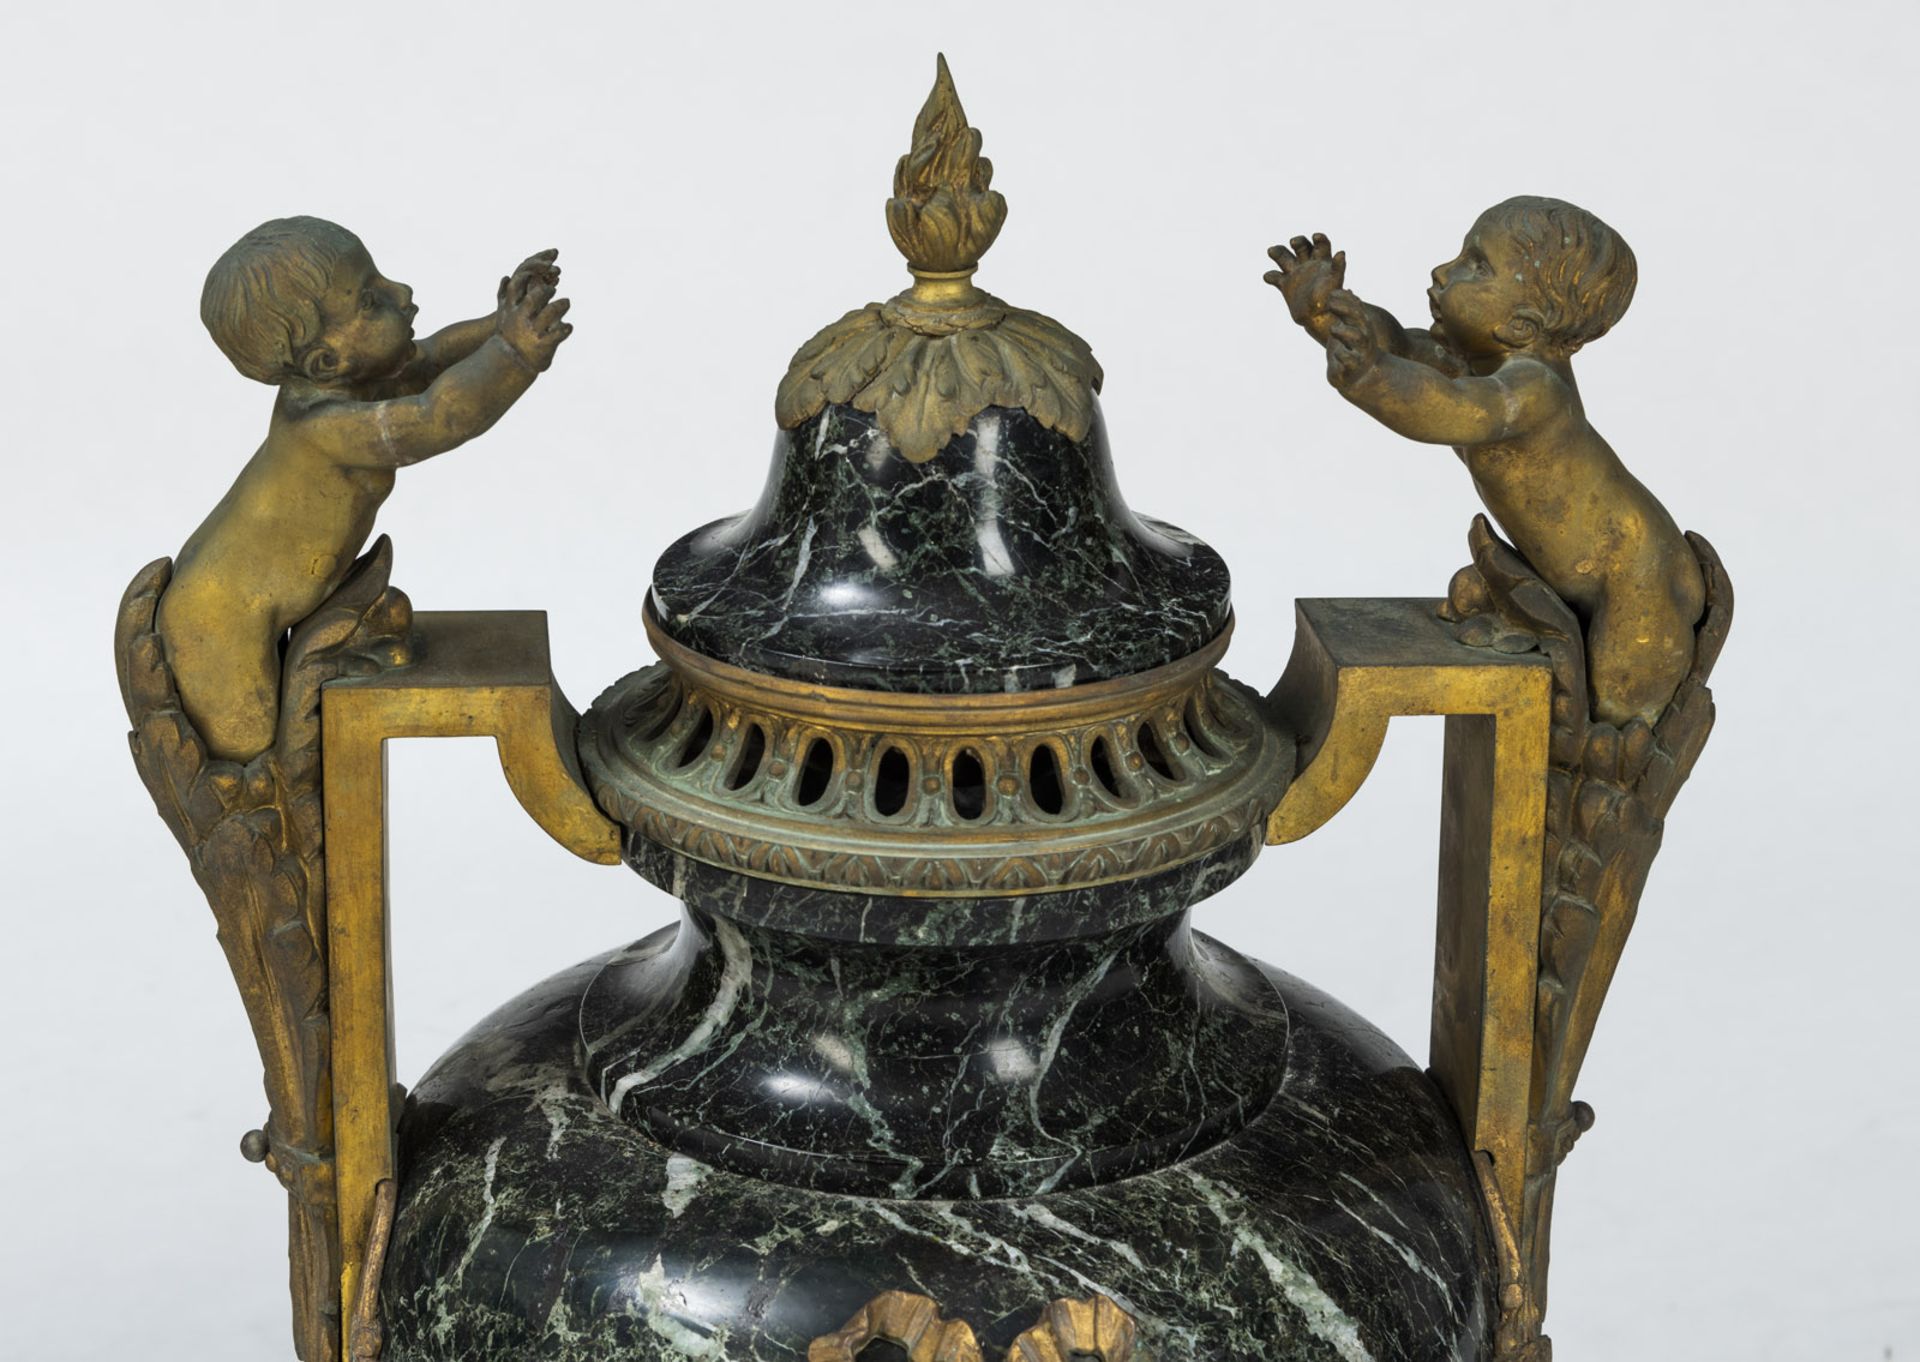 A PAIR OF FRENCH ORMOLU MOUNTED VERT DE MER MARBLE TWO-HANDLED VASES - Image 3 of 4